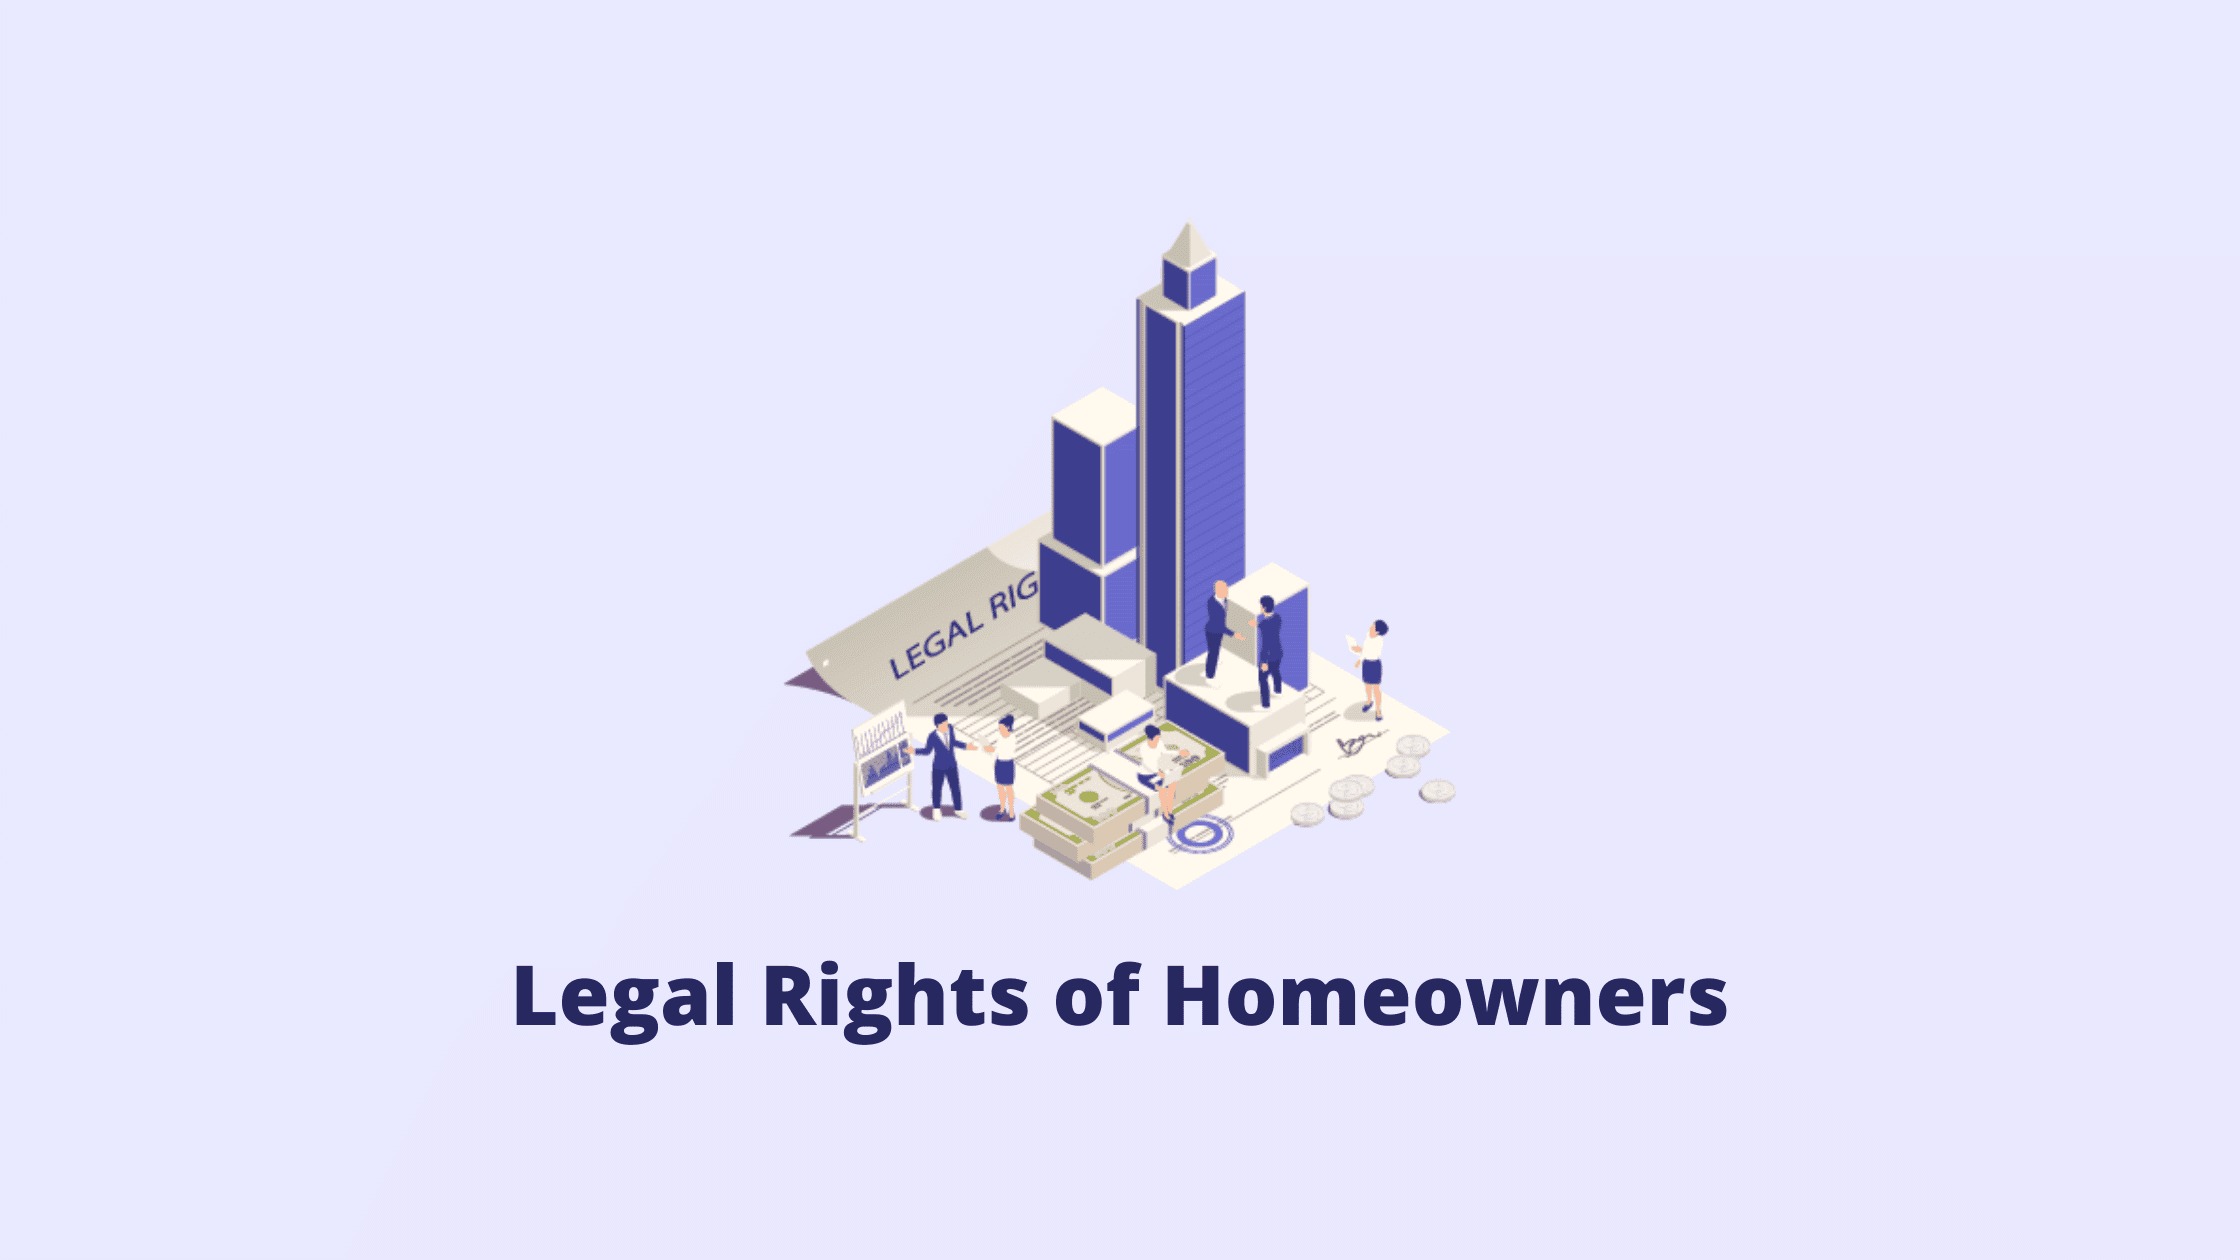 What Are the Legal Rights of Homeowners as Members of Housing Society?